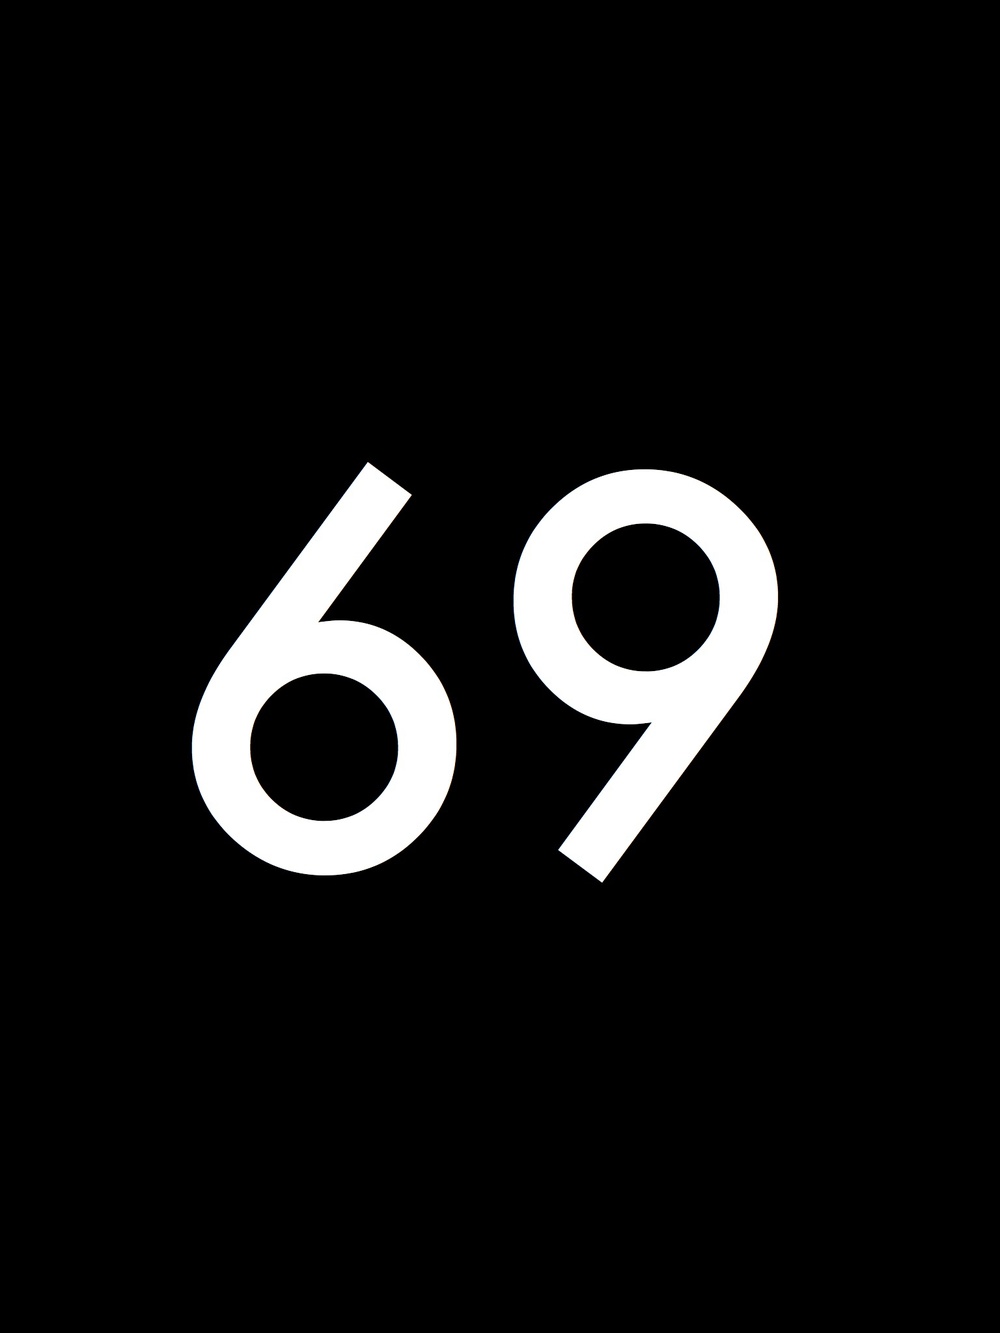 3D number 69 with flames black background Stock Illustration  Adobe Stock